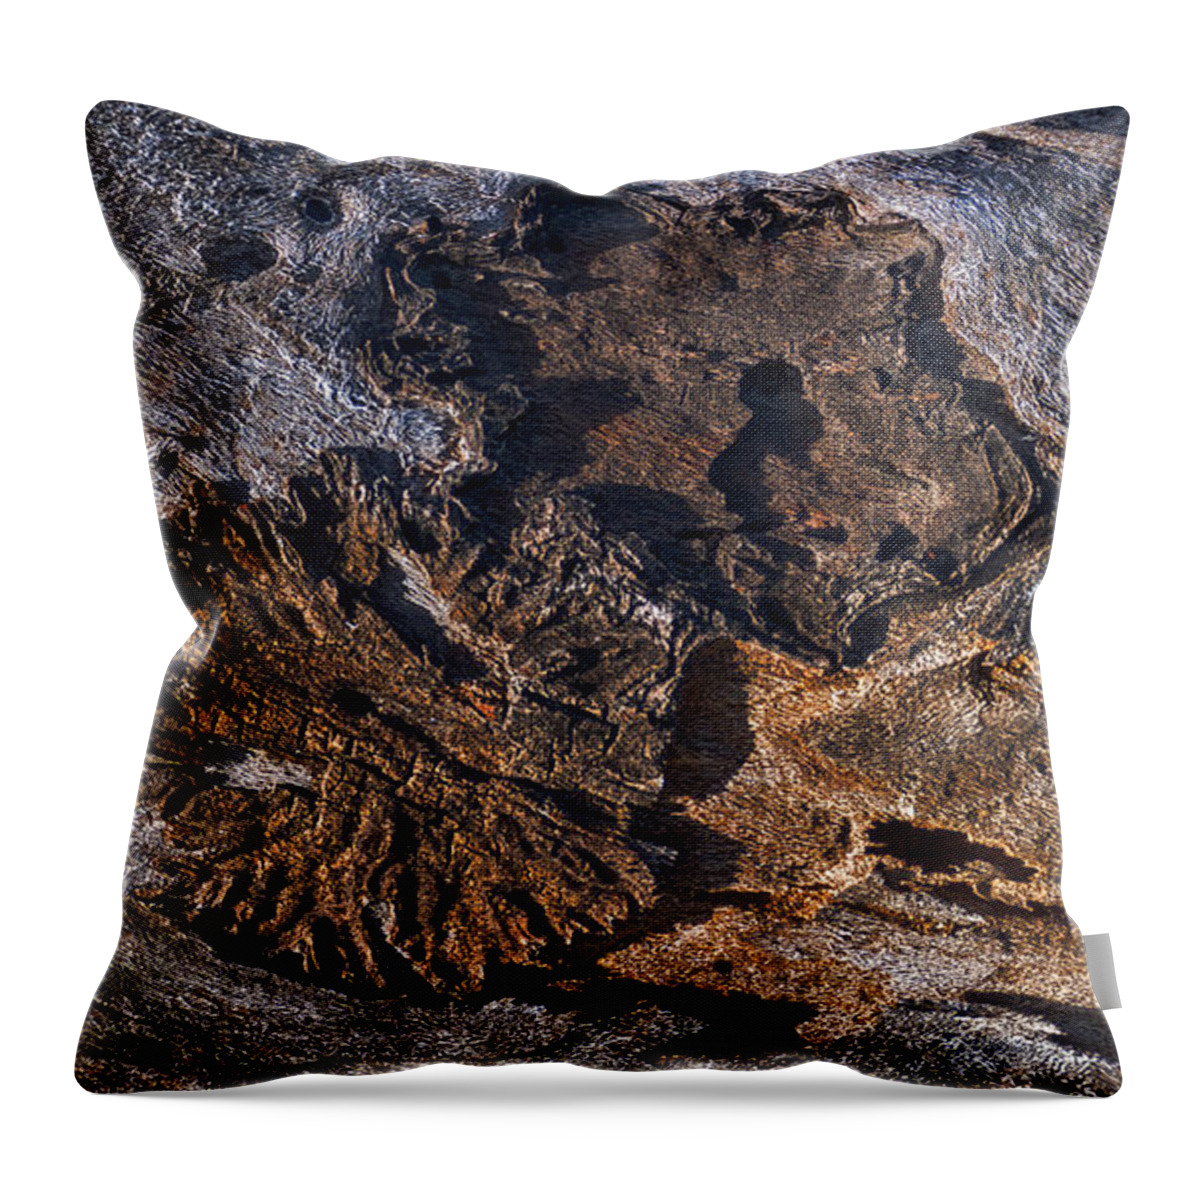 Tree Throw Pillow featuring the photograph Bark Designs by Sandra Selle Rodriguez